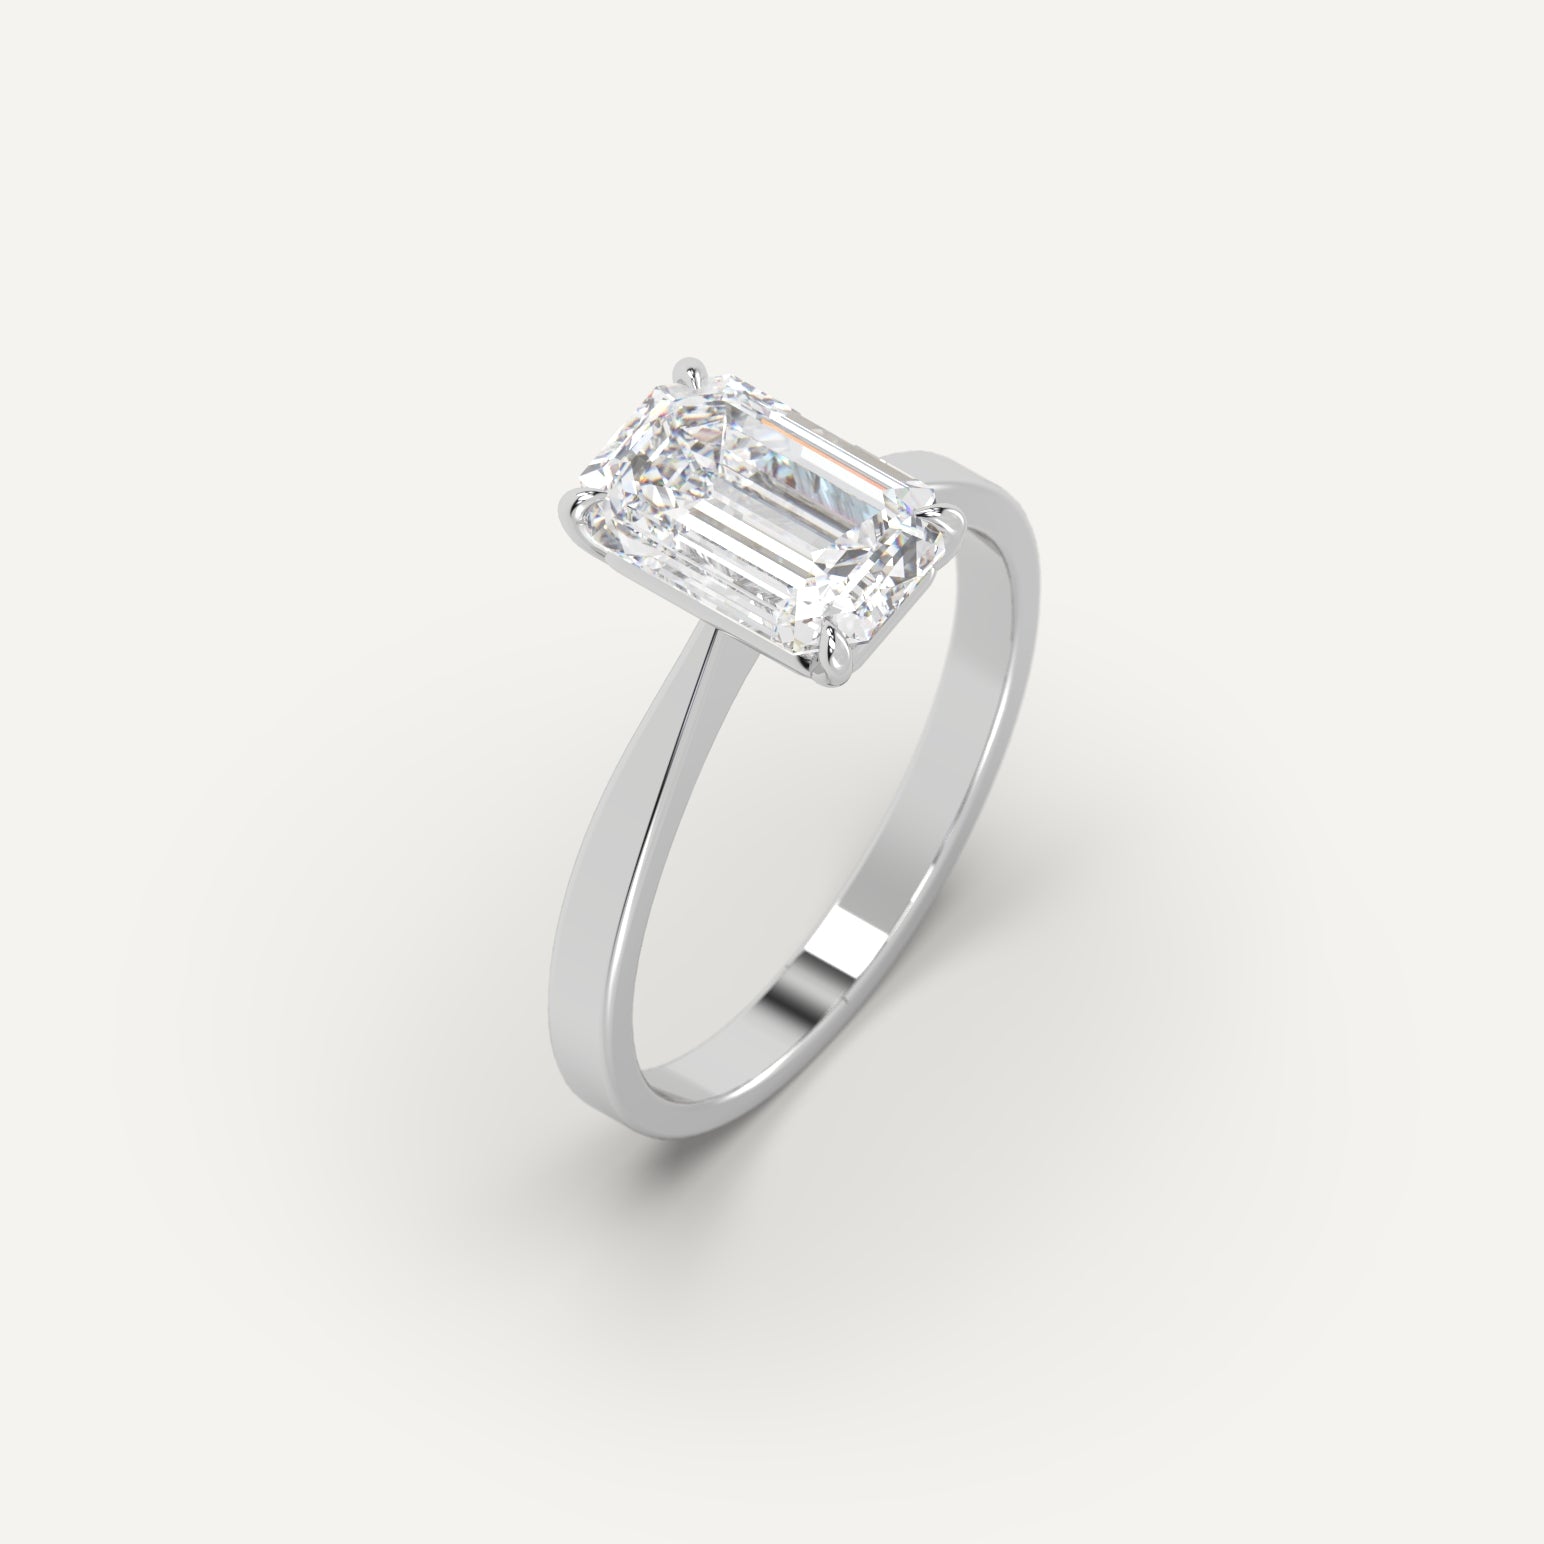 4 carat Emerald Cut Engagement Ring in 14k White Gold